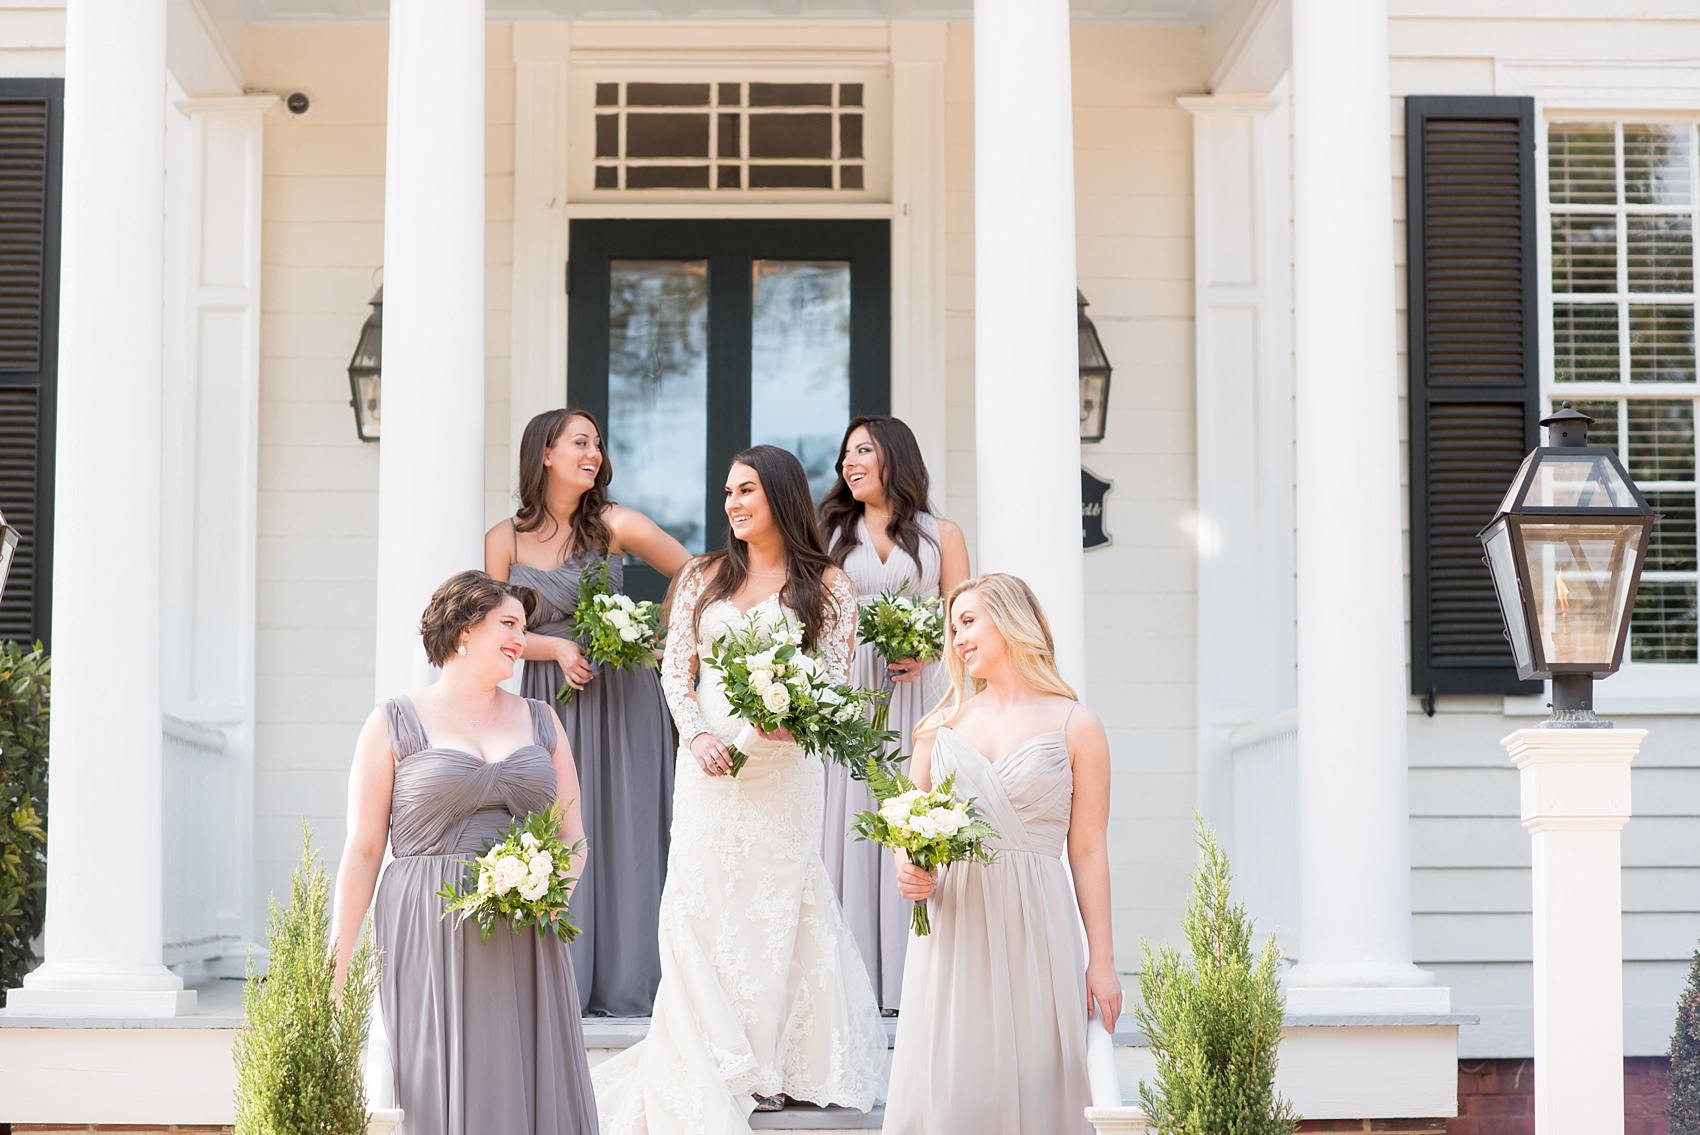 The Sutherland Wedding Photos by Mikkel Paige Photography. Vogue-like bridal party picture with the bride in lace Pronovias and bridesmaids party in various shades of grey gowns. Planning by A Southern Soiree.